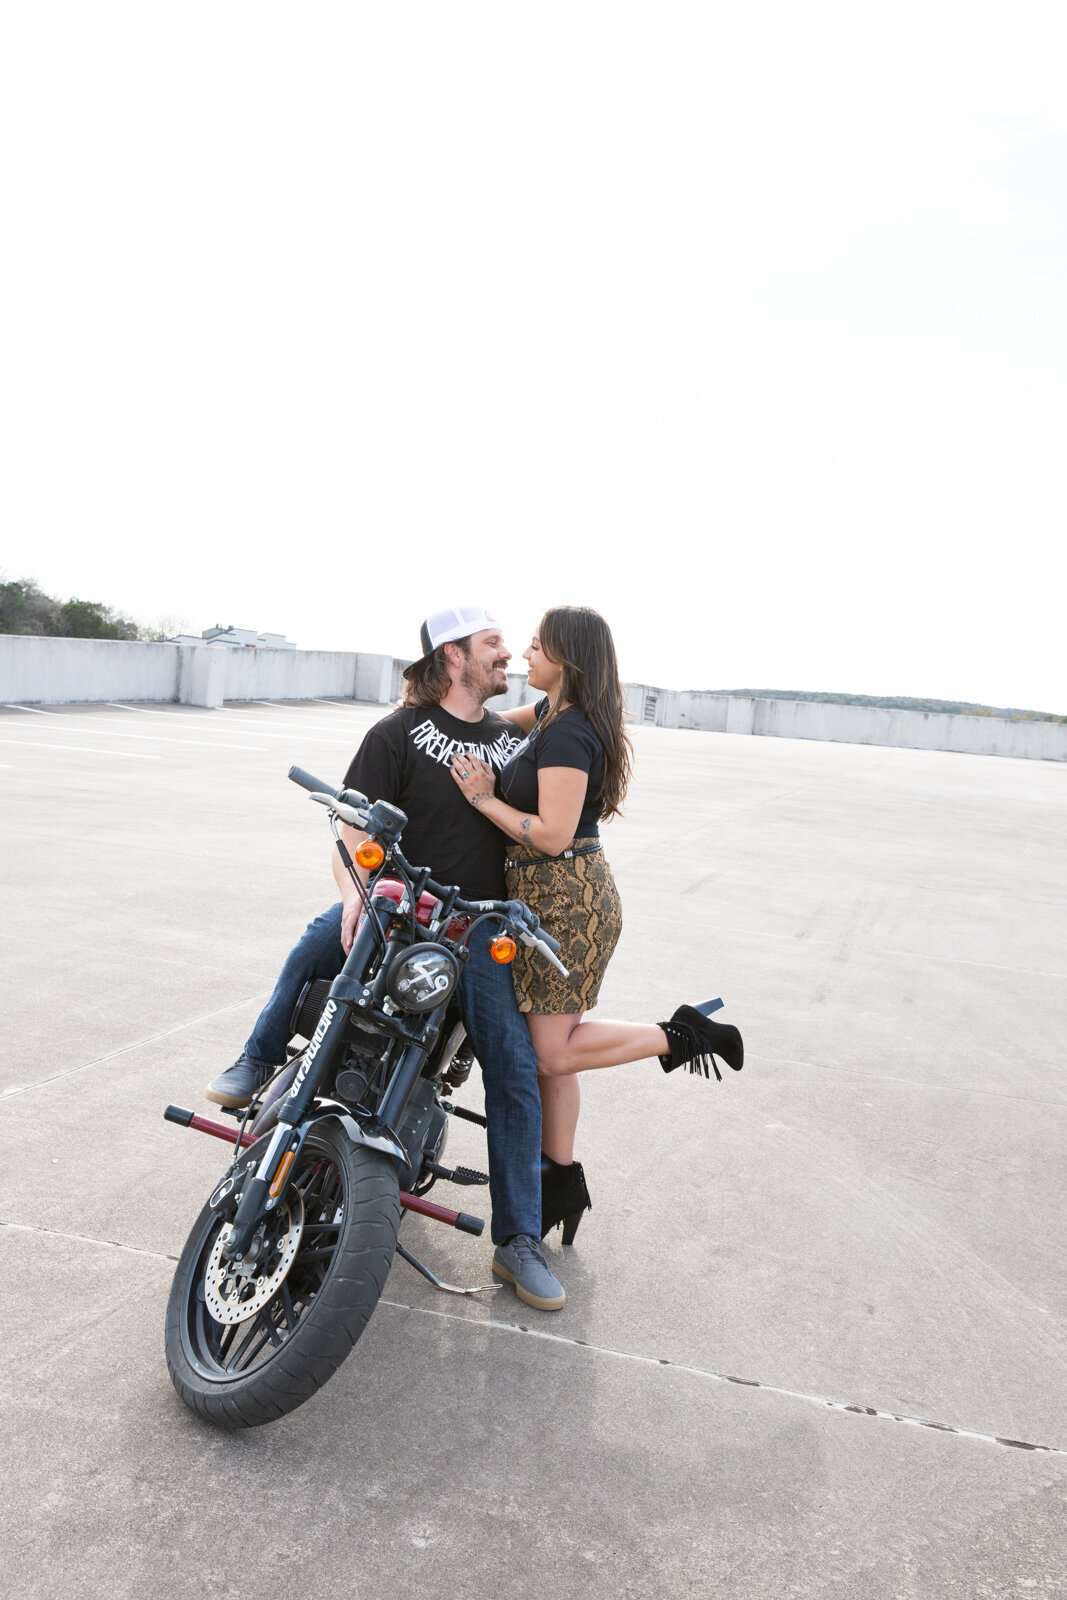 A couple kissing on a motorcycle in a parking lot captured beautifully by an Austin wedding photographer.